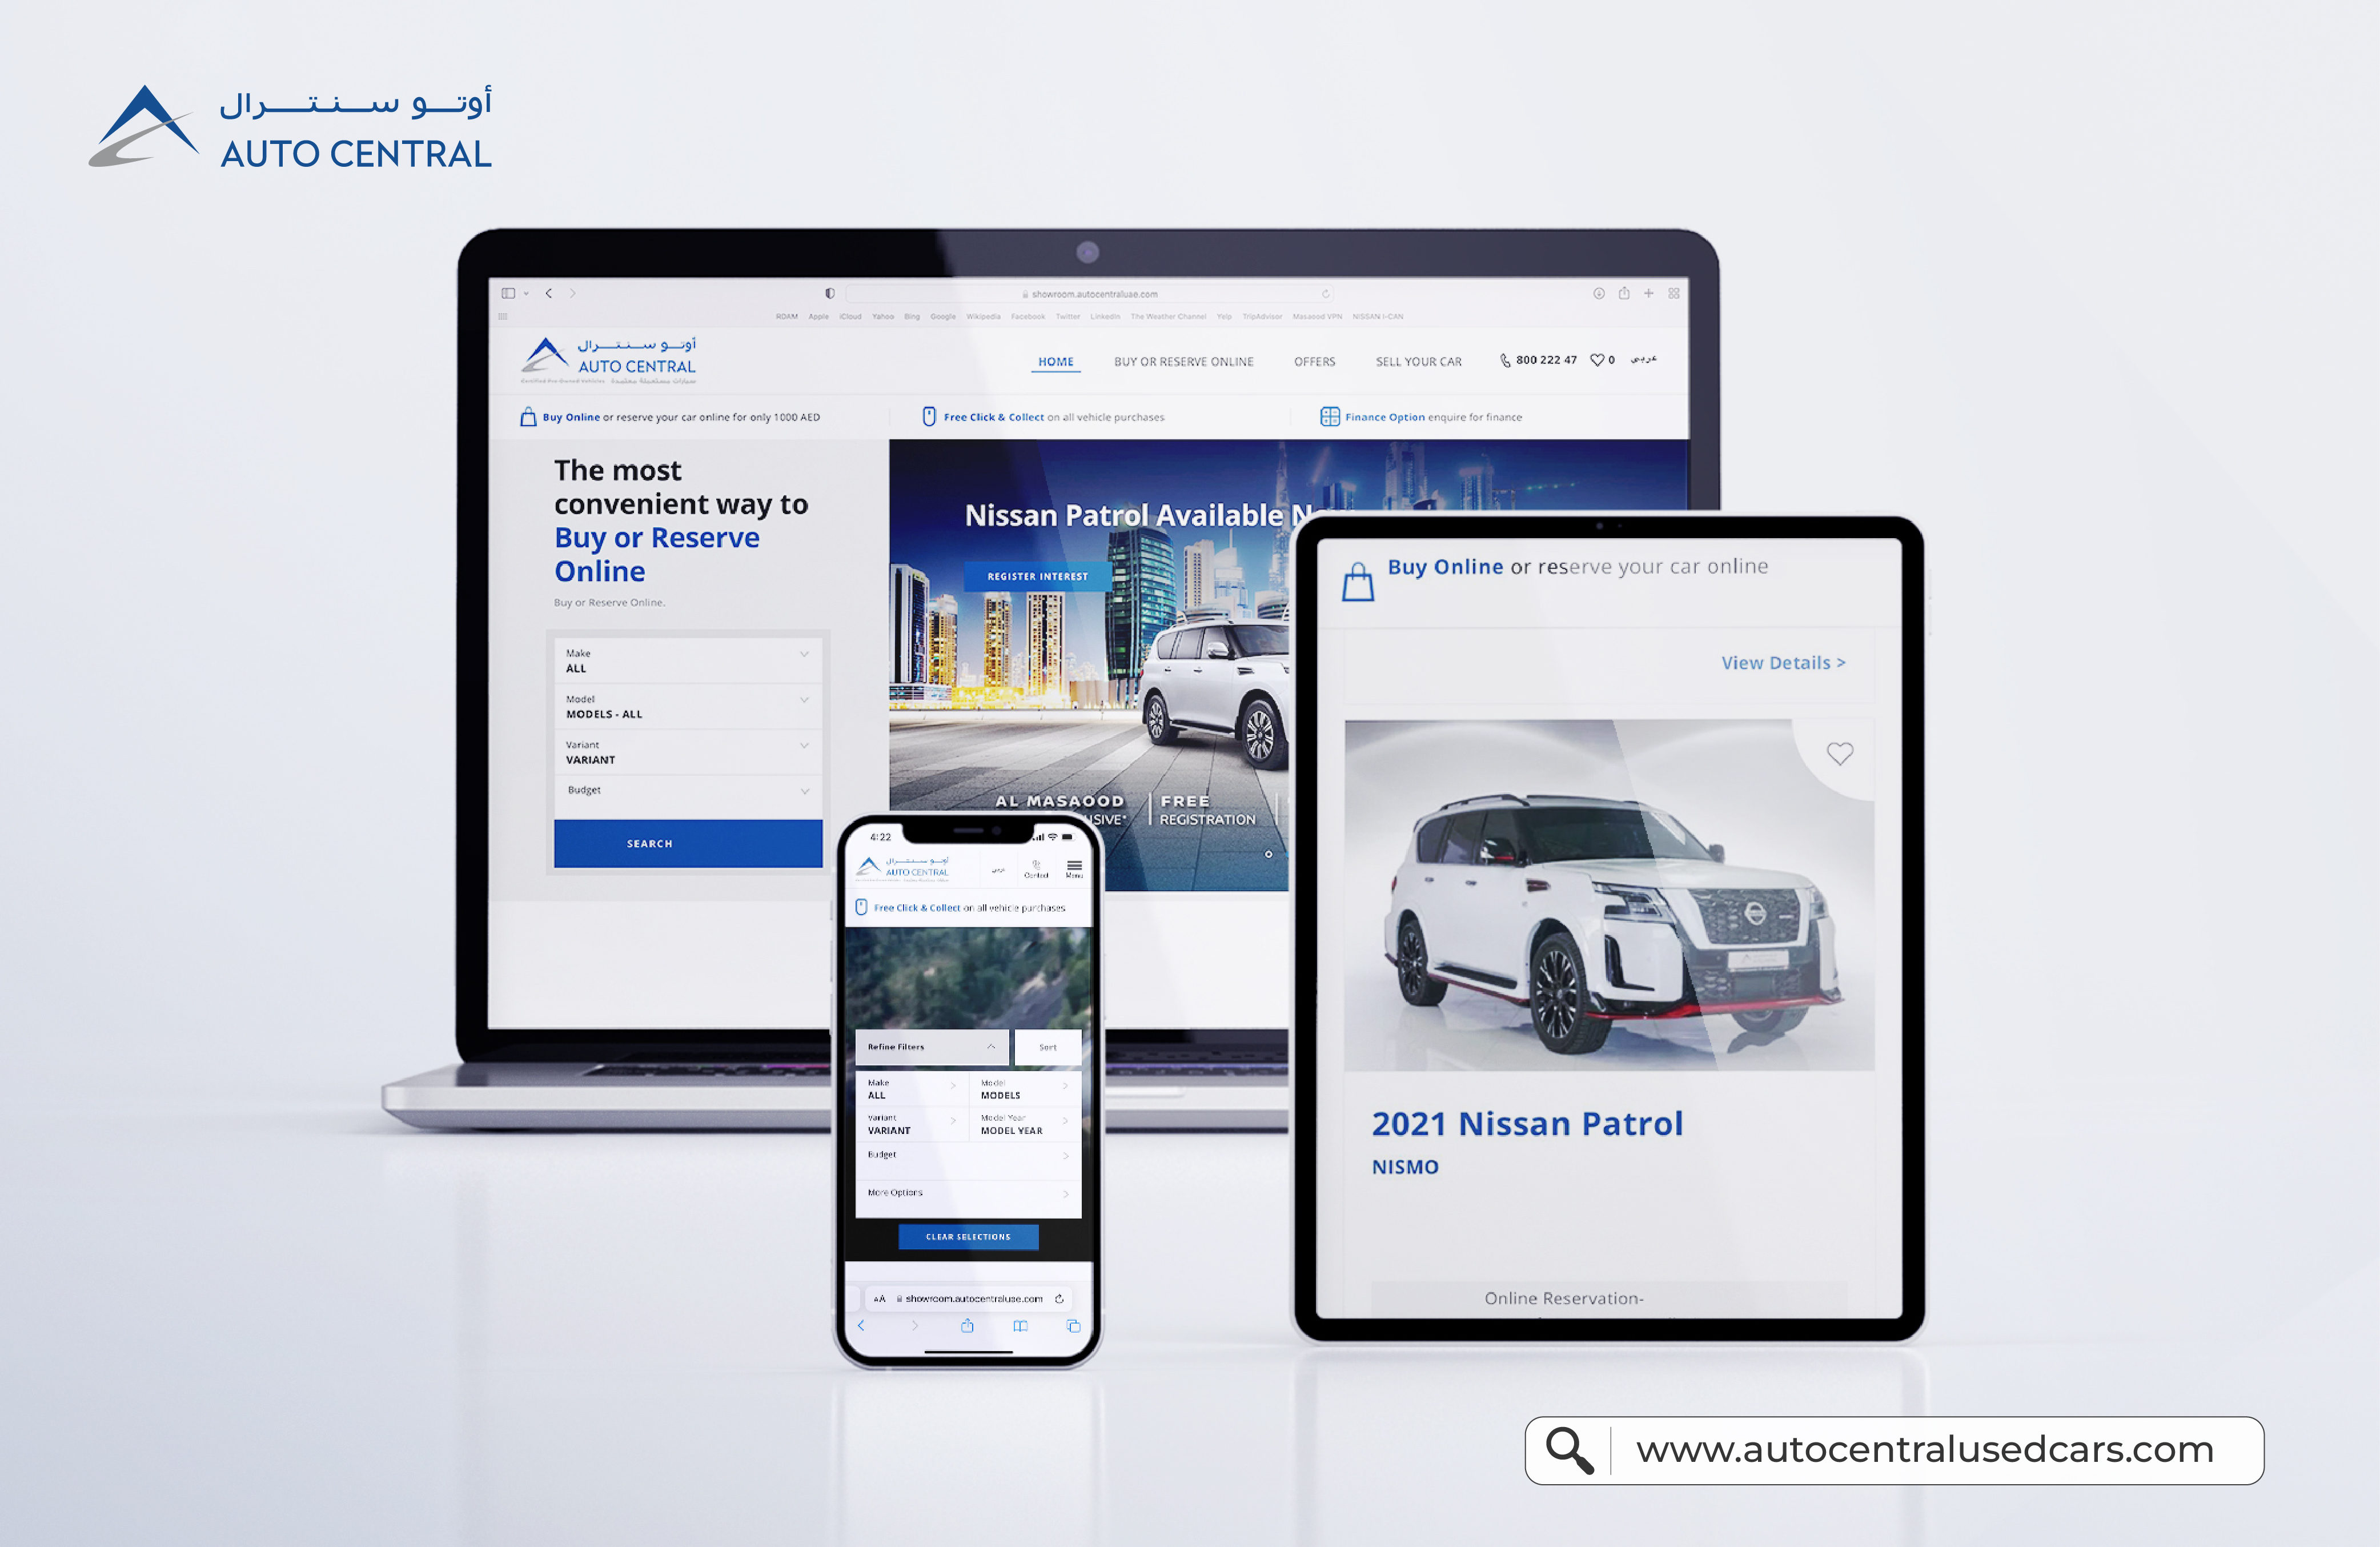 AutoCentral Launches New Website Offering Customers Smooth Automotive Purchase Experience 